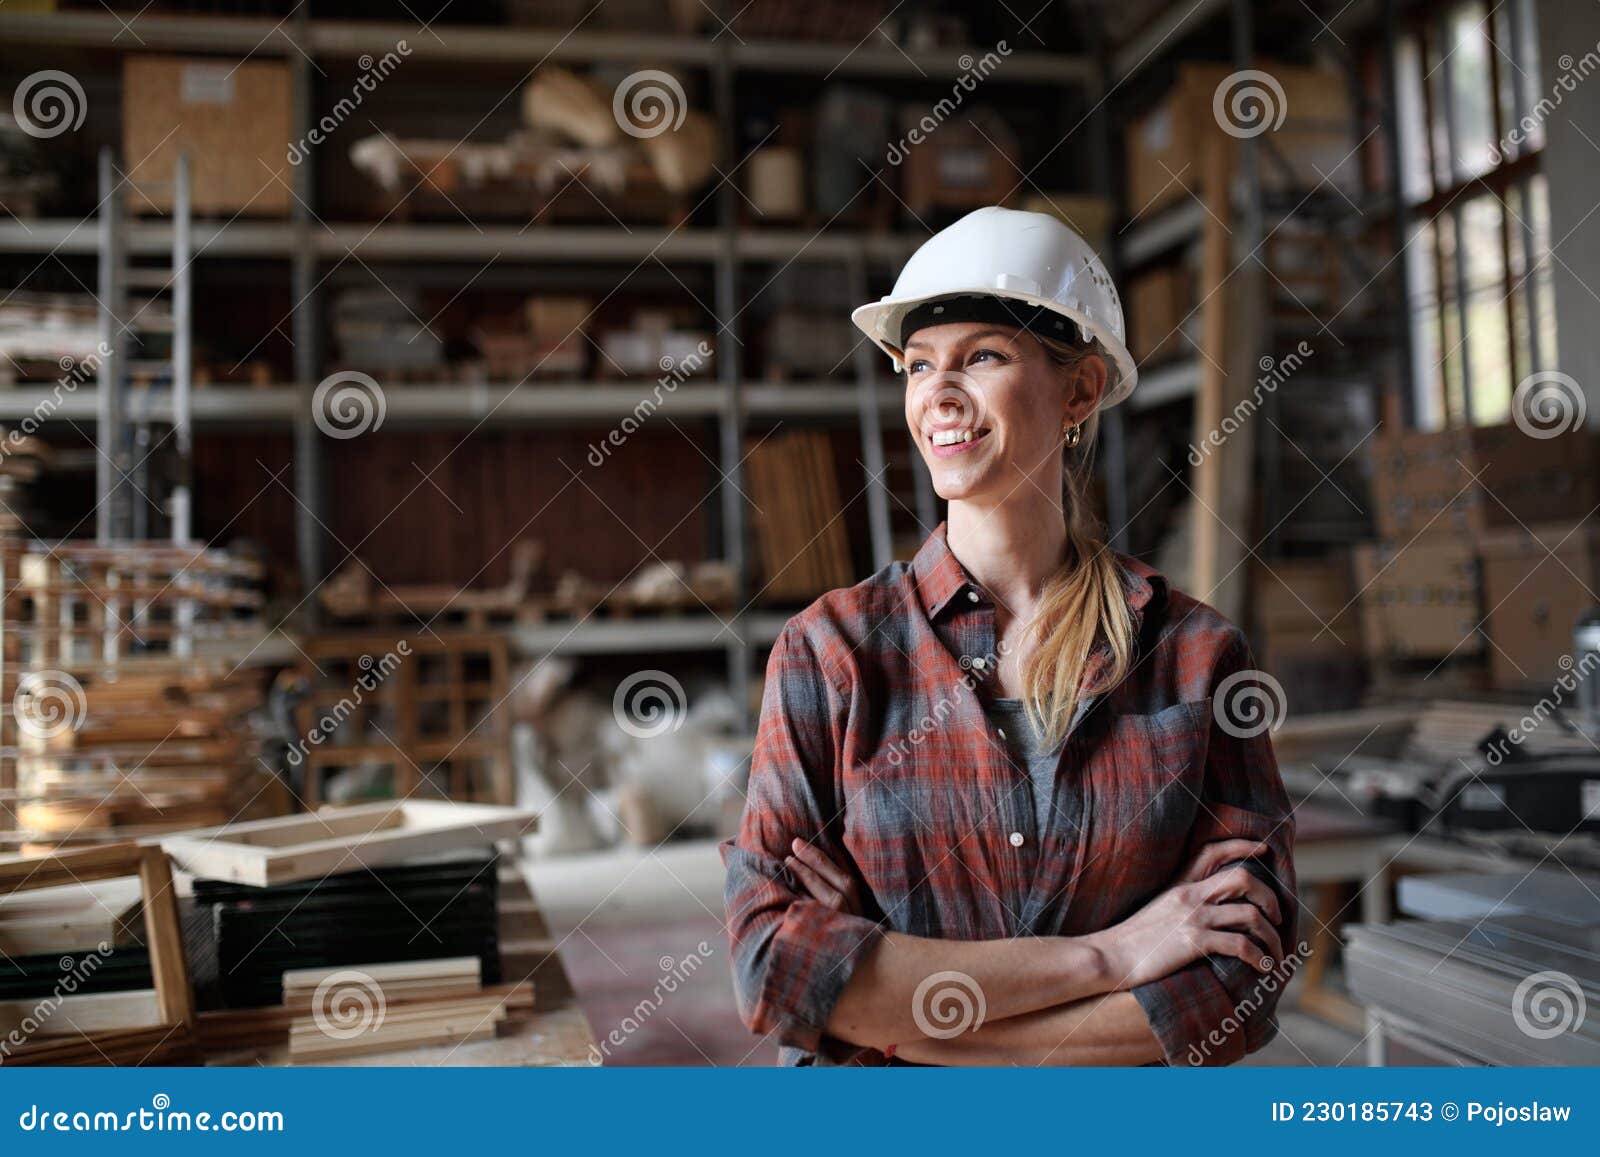 portrait of mid-adult female carpenter standing in carpentery workshop, looking aside and smiling. small business